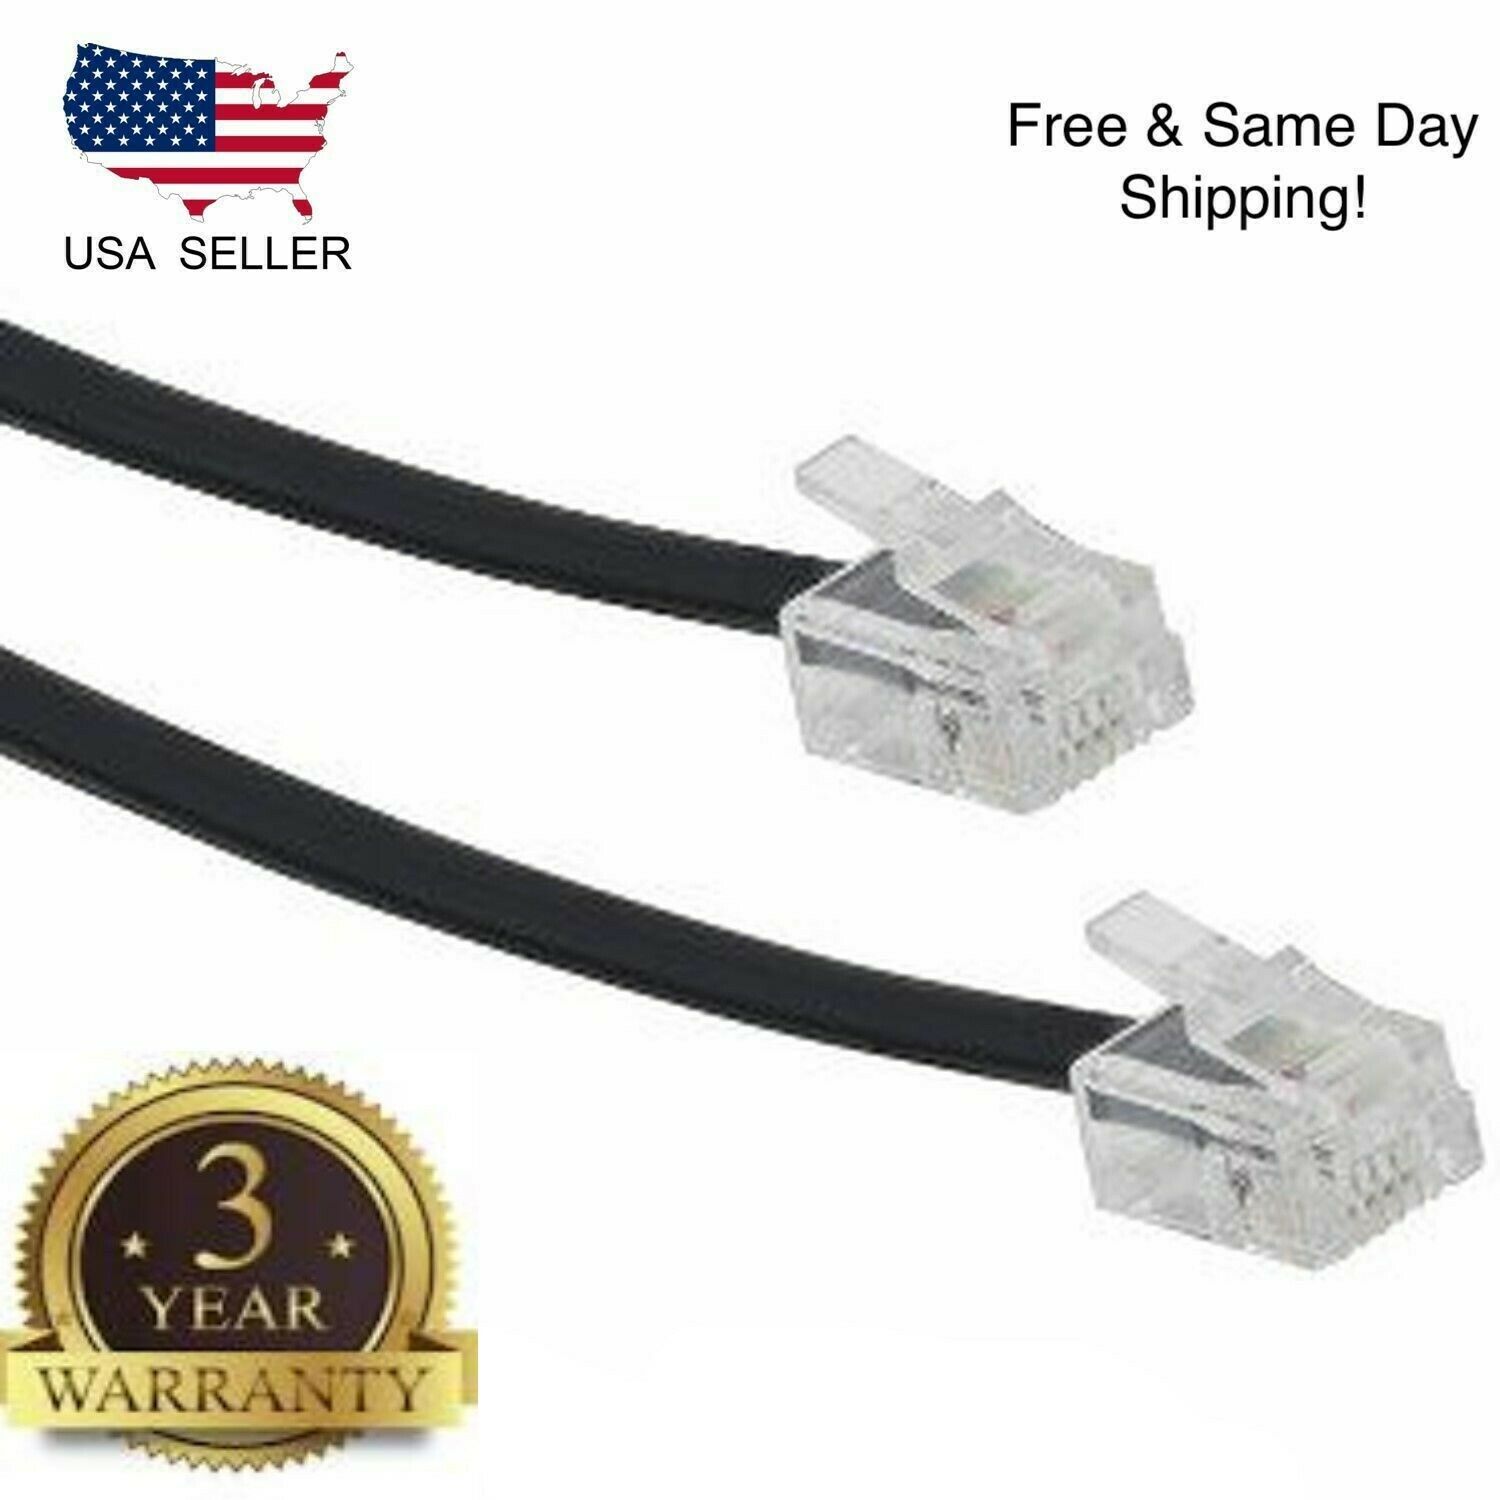 10ft Telephone Line Cord Cable Wire 6p4c Rj11 Dsl Modem Fax Phone To Wall Black